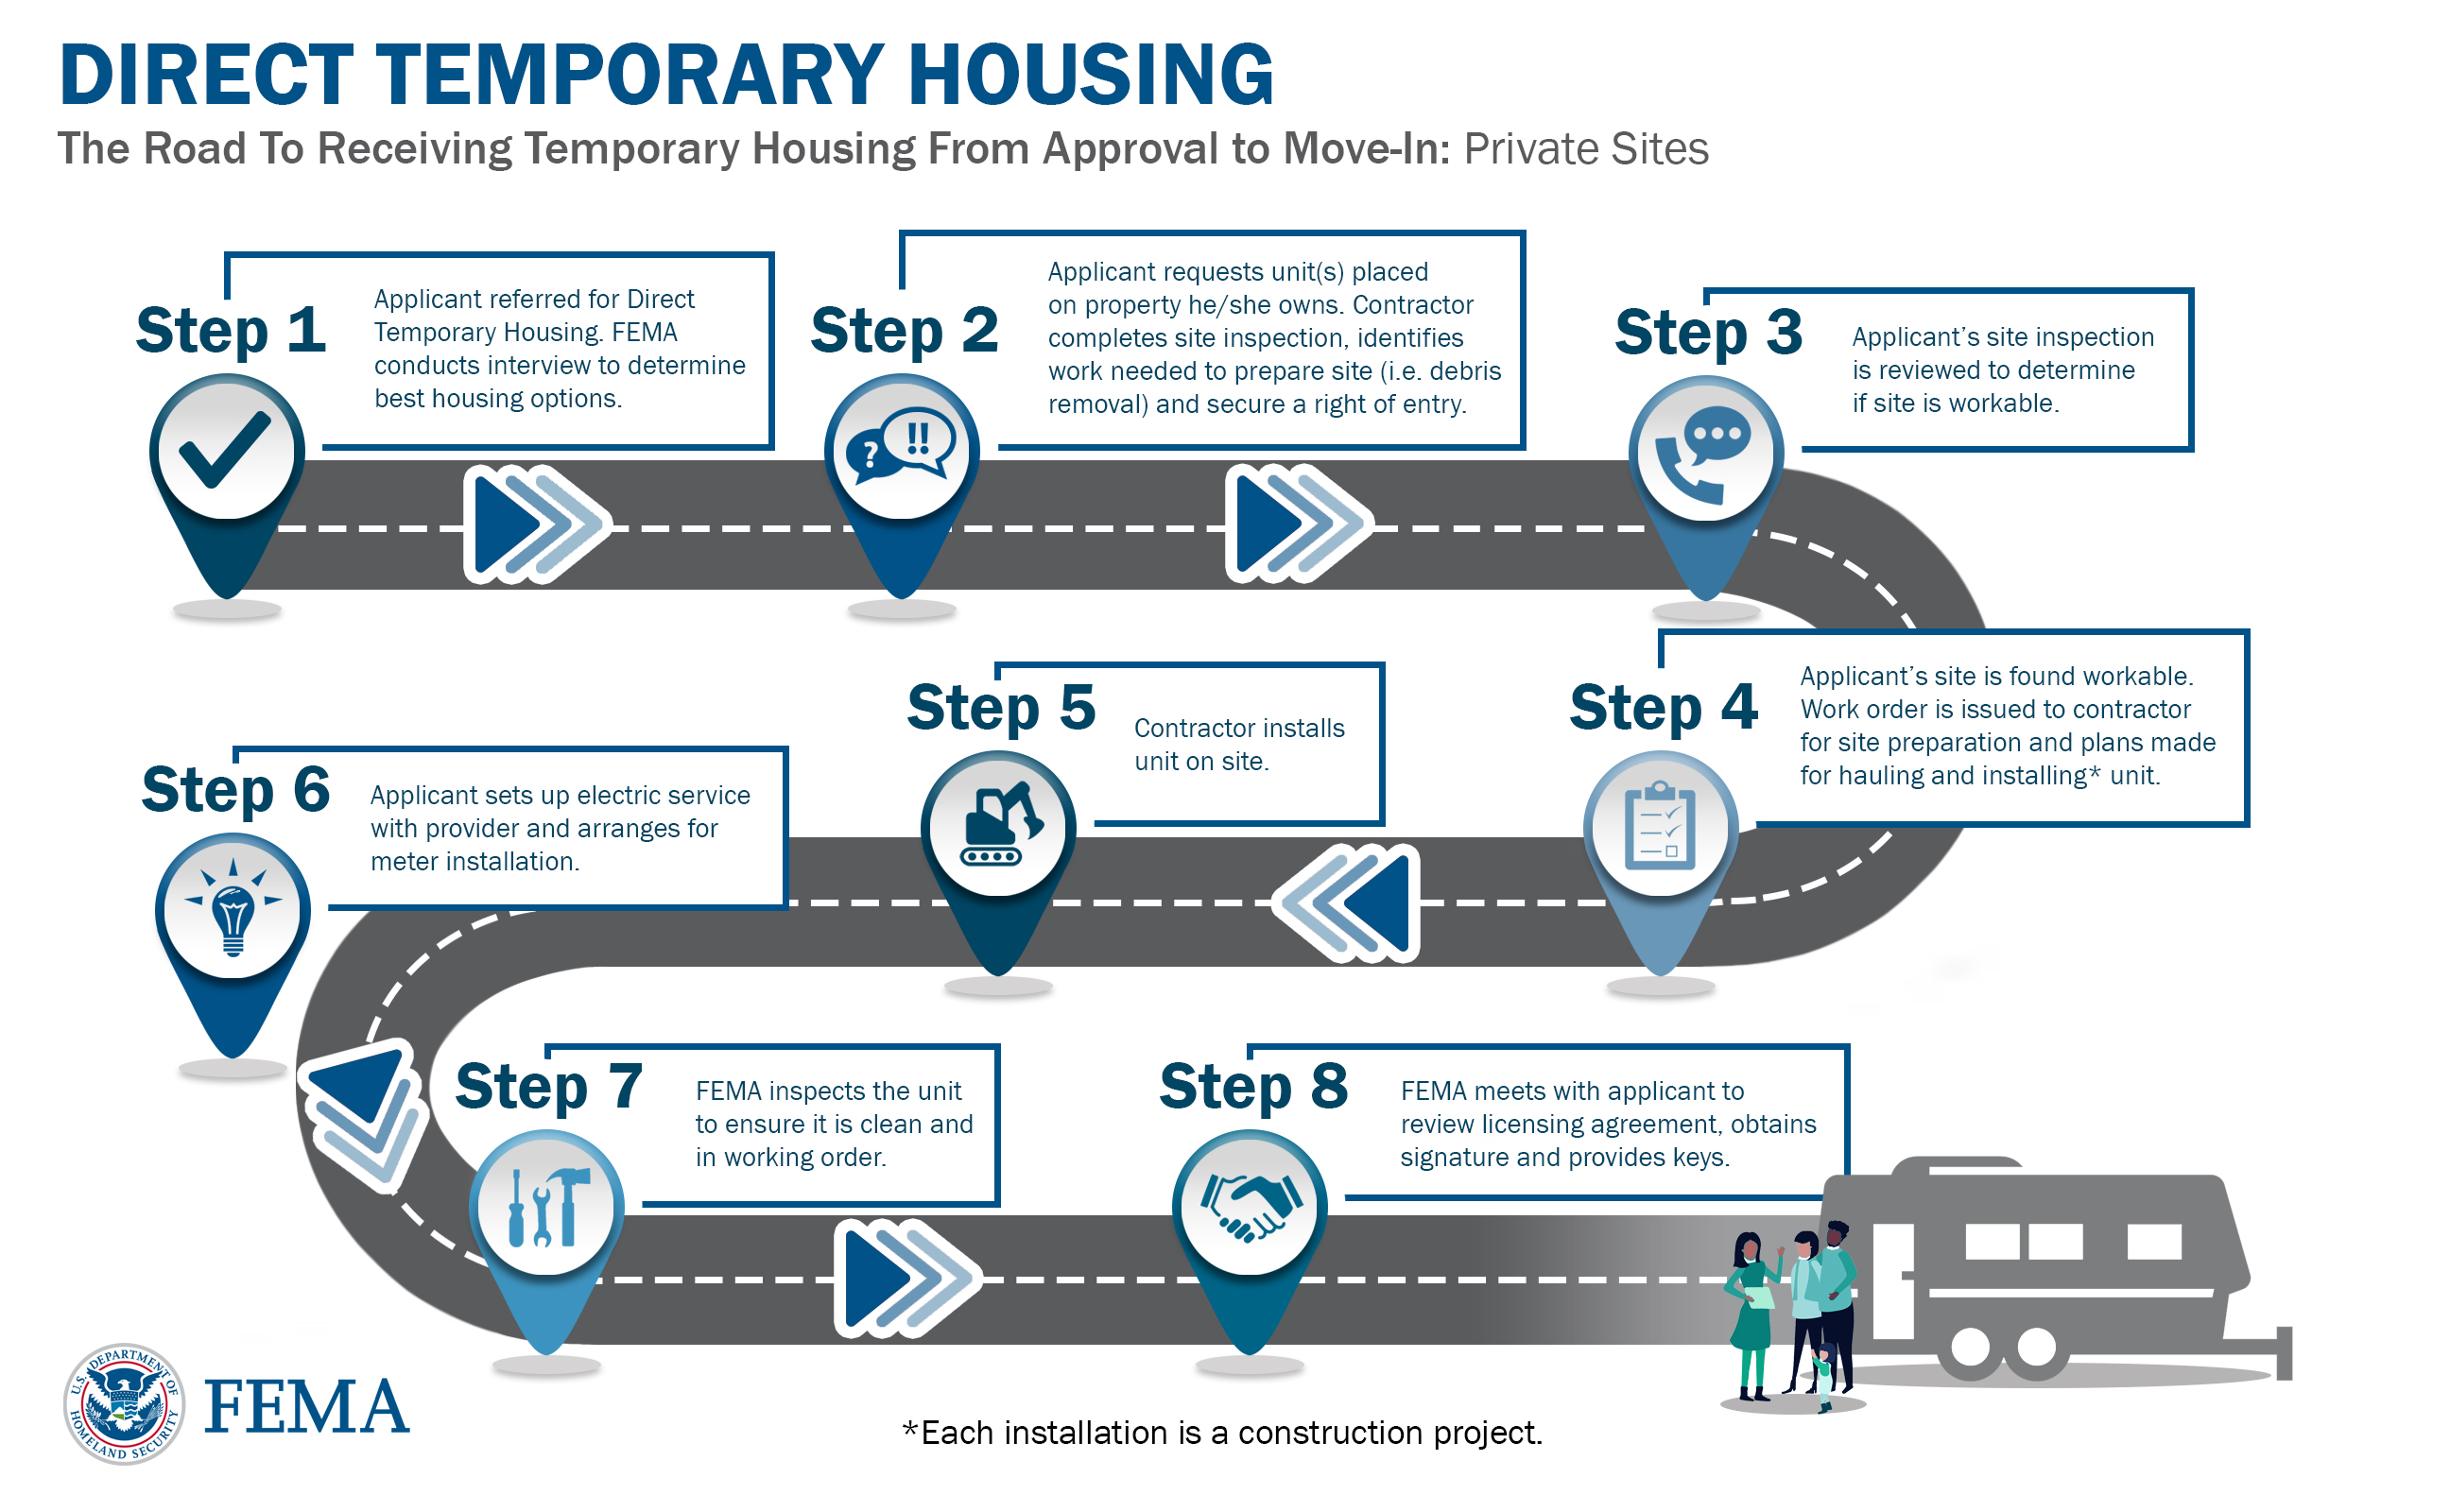 A graphic of a road map explaining the direct temporary housing program for private sites from approval to move-in 